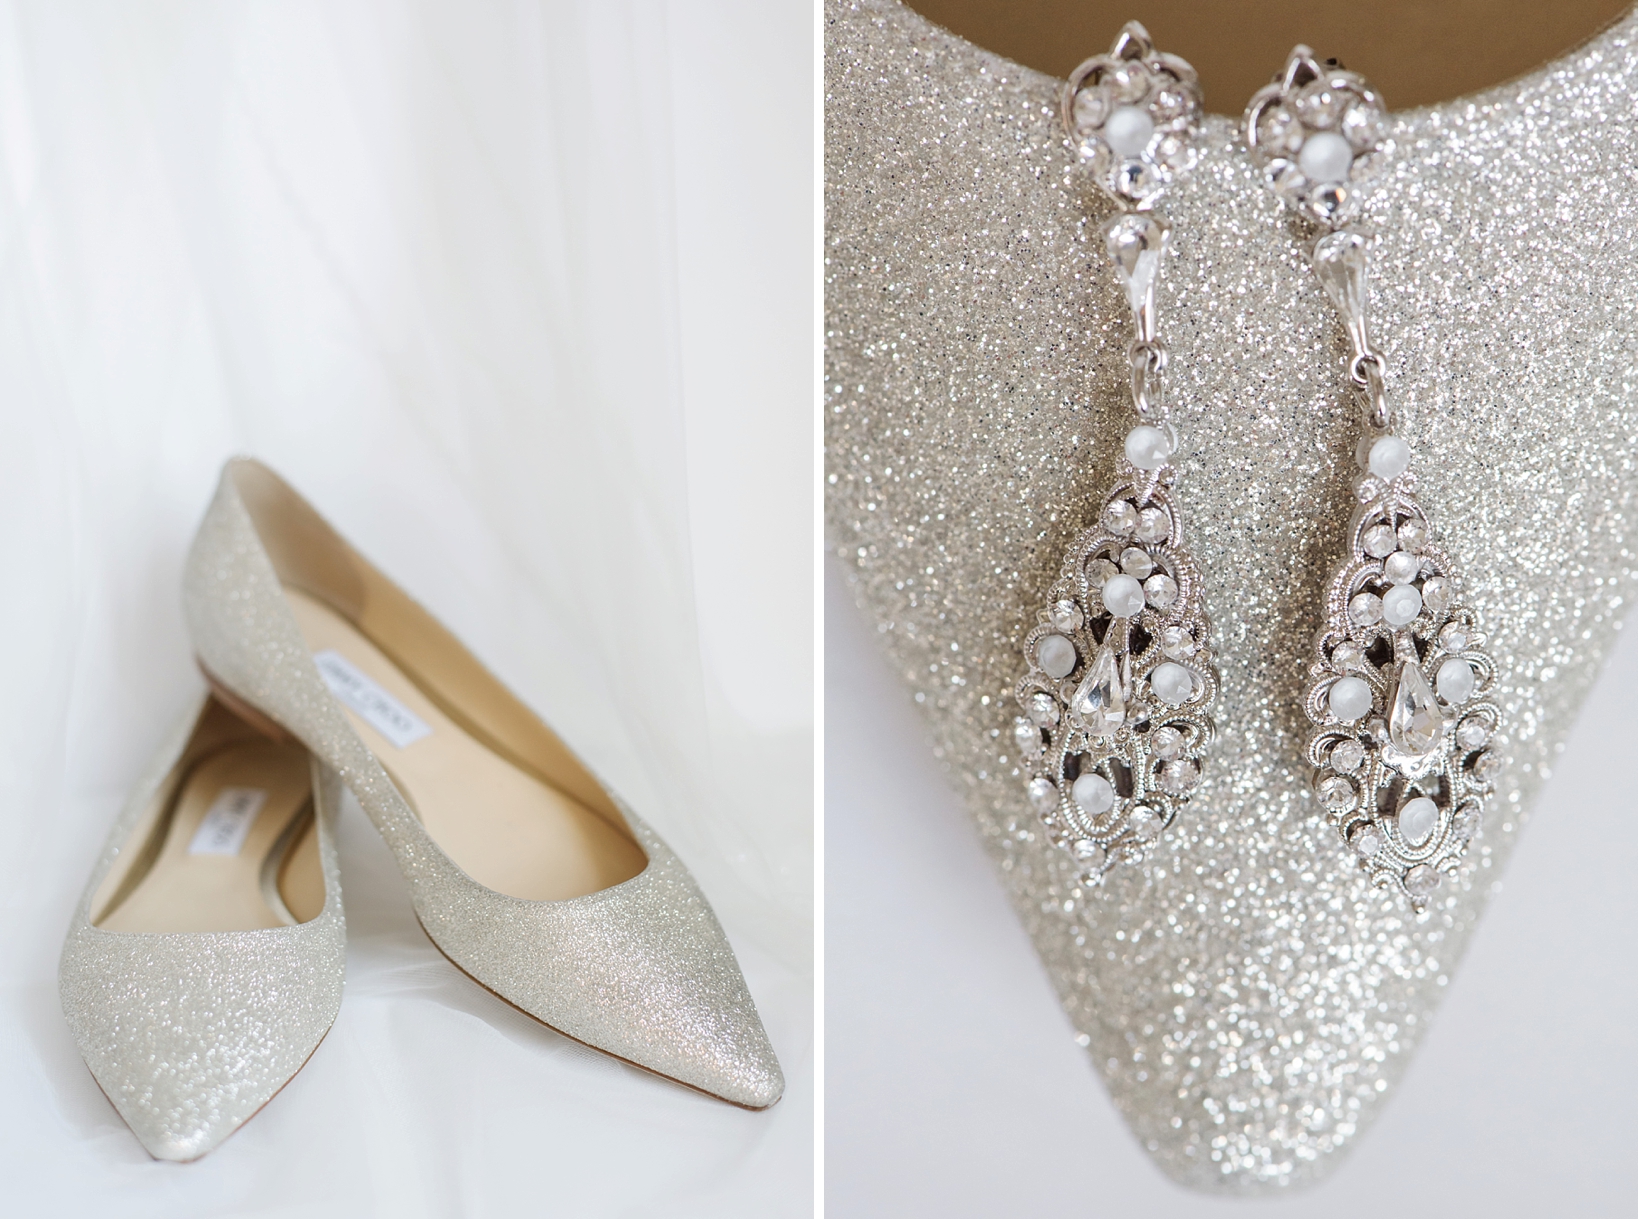 Jimmy Choo silver flats with detailed bridal earrings